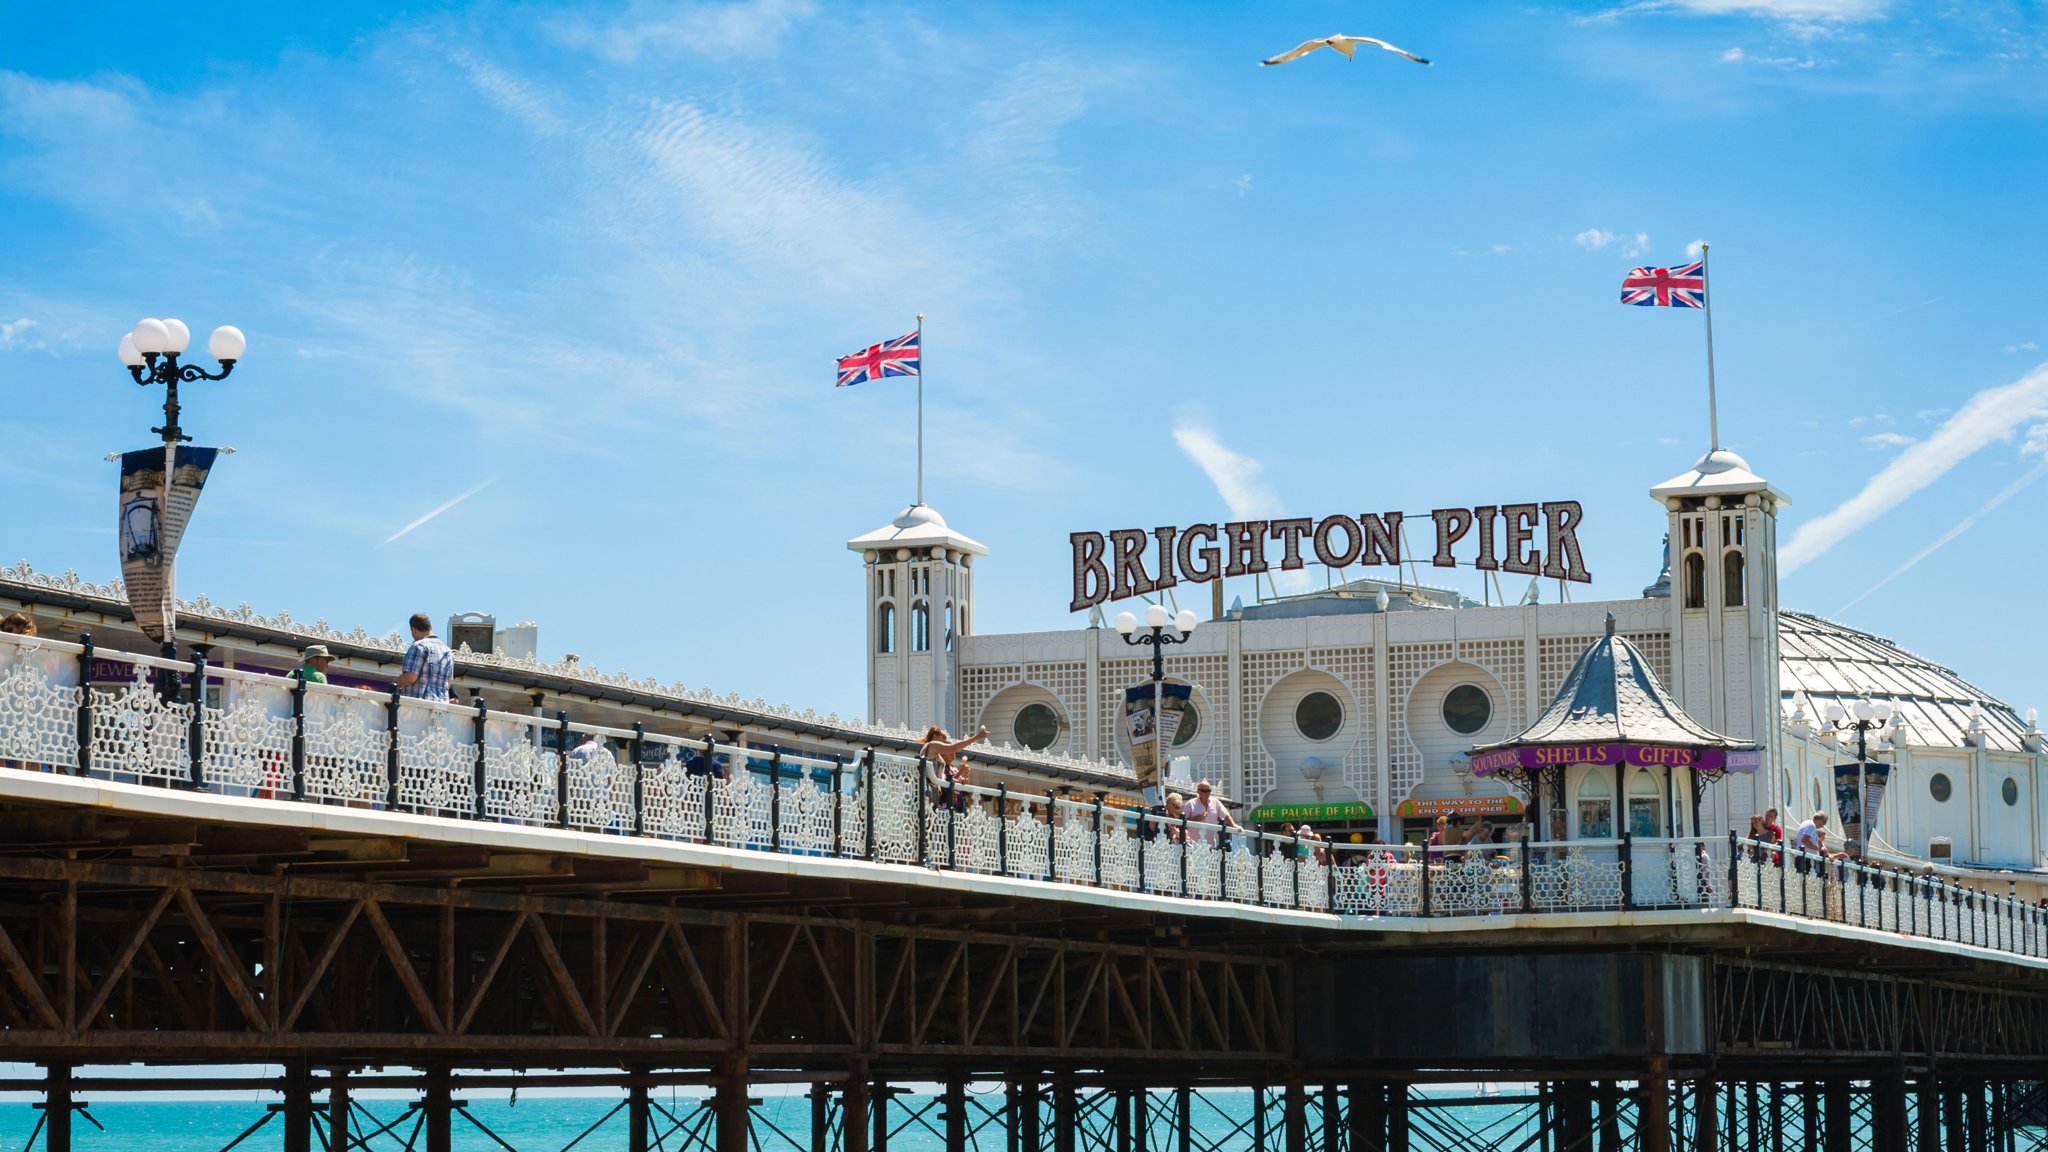 Brighton Pier to be sold for £18m